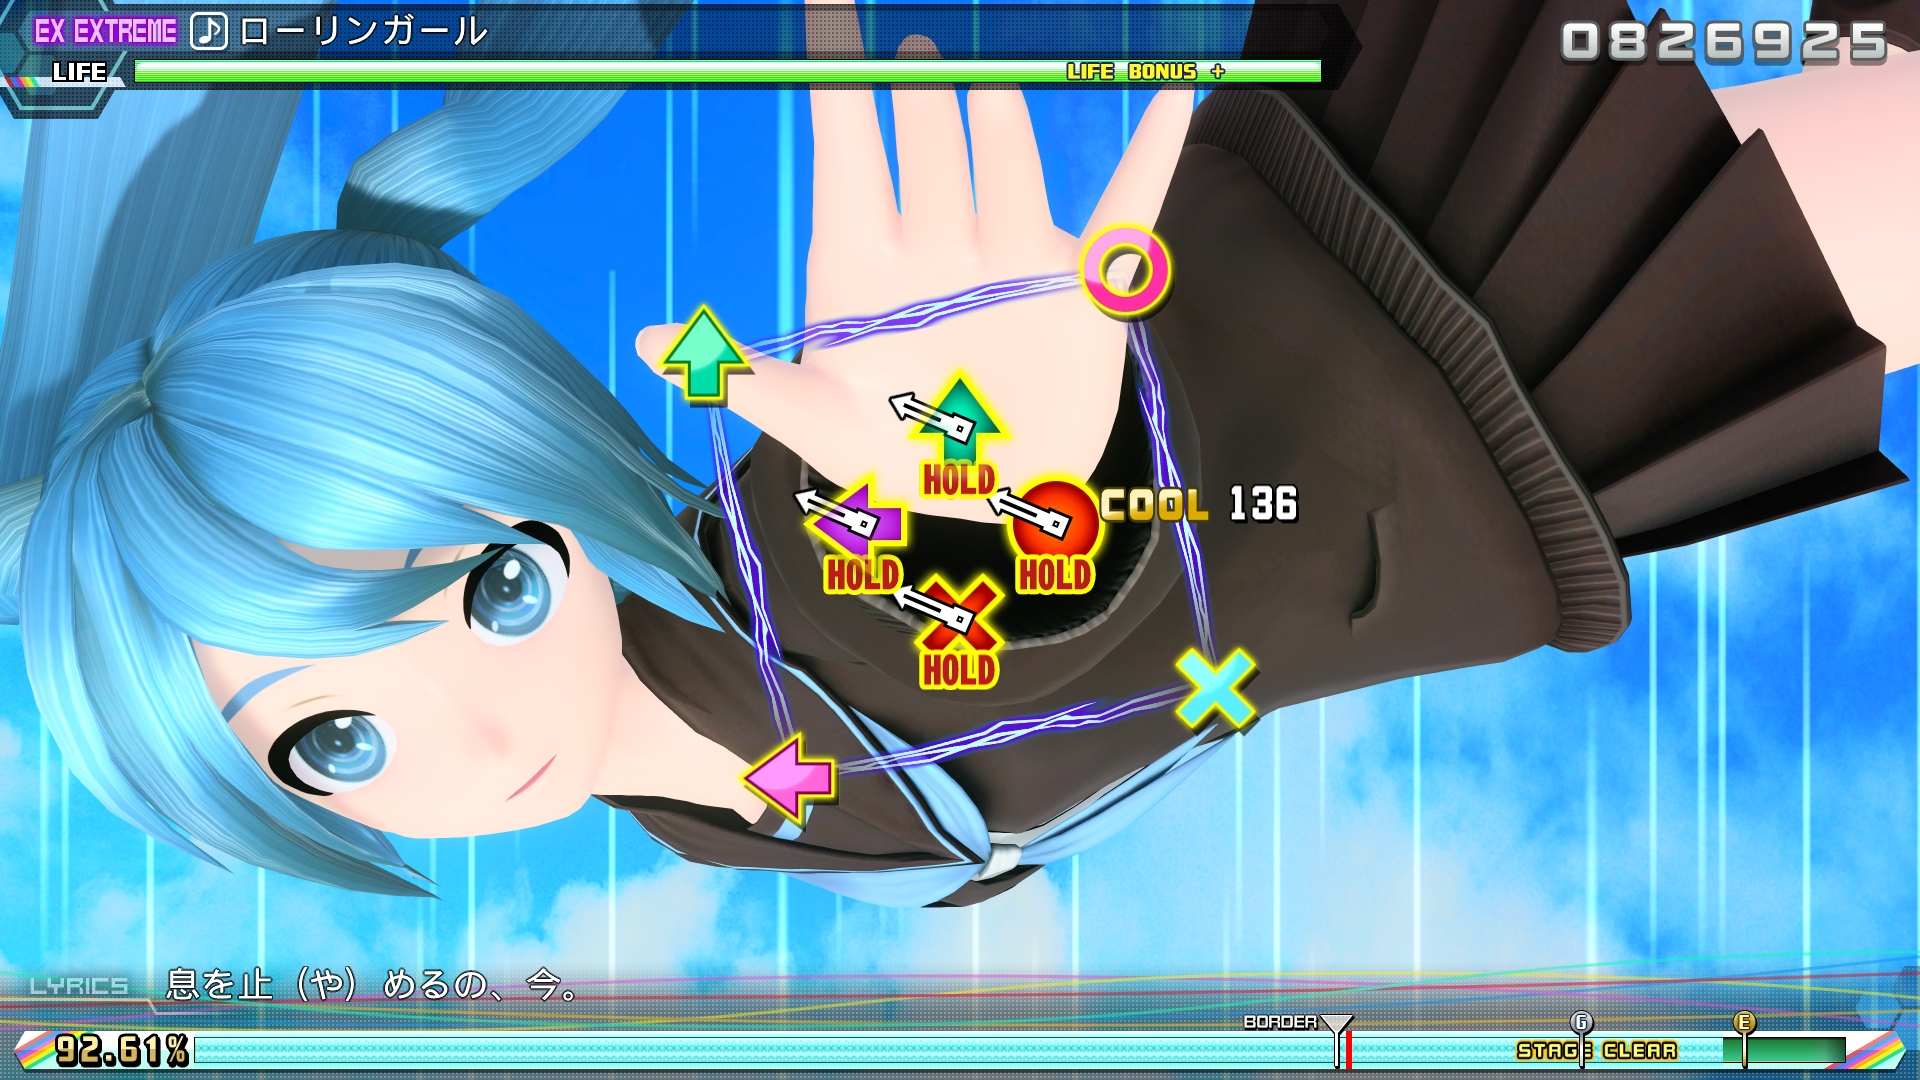 Hatsune Miku: Project DIVA Future Tone 1.06 update launches April 19, adds Extra Extreme to 10 songs - Gematsu